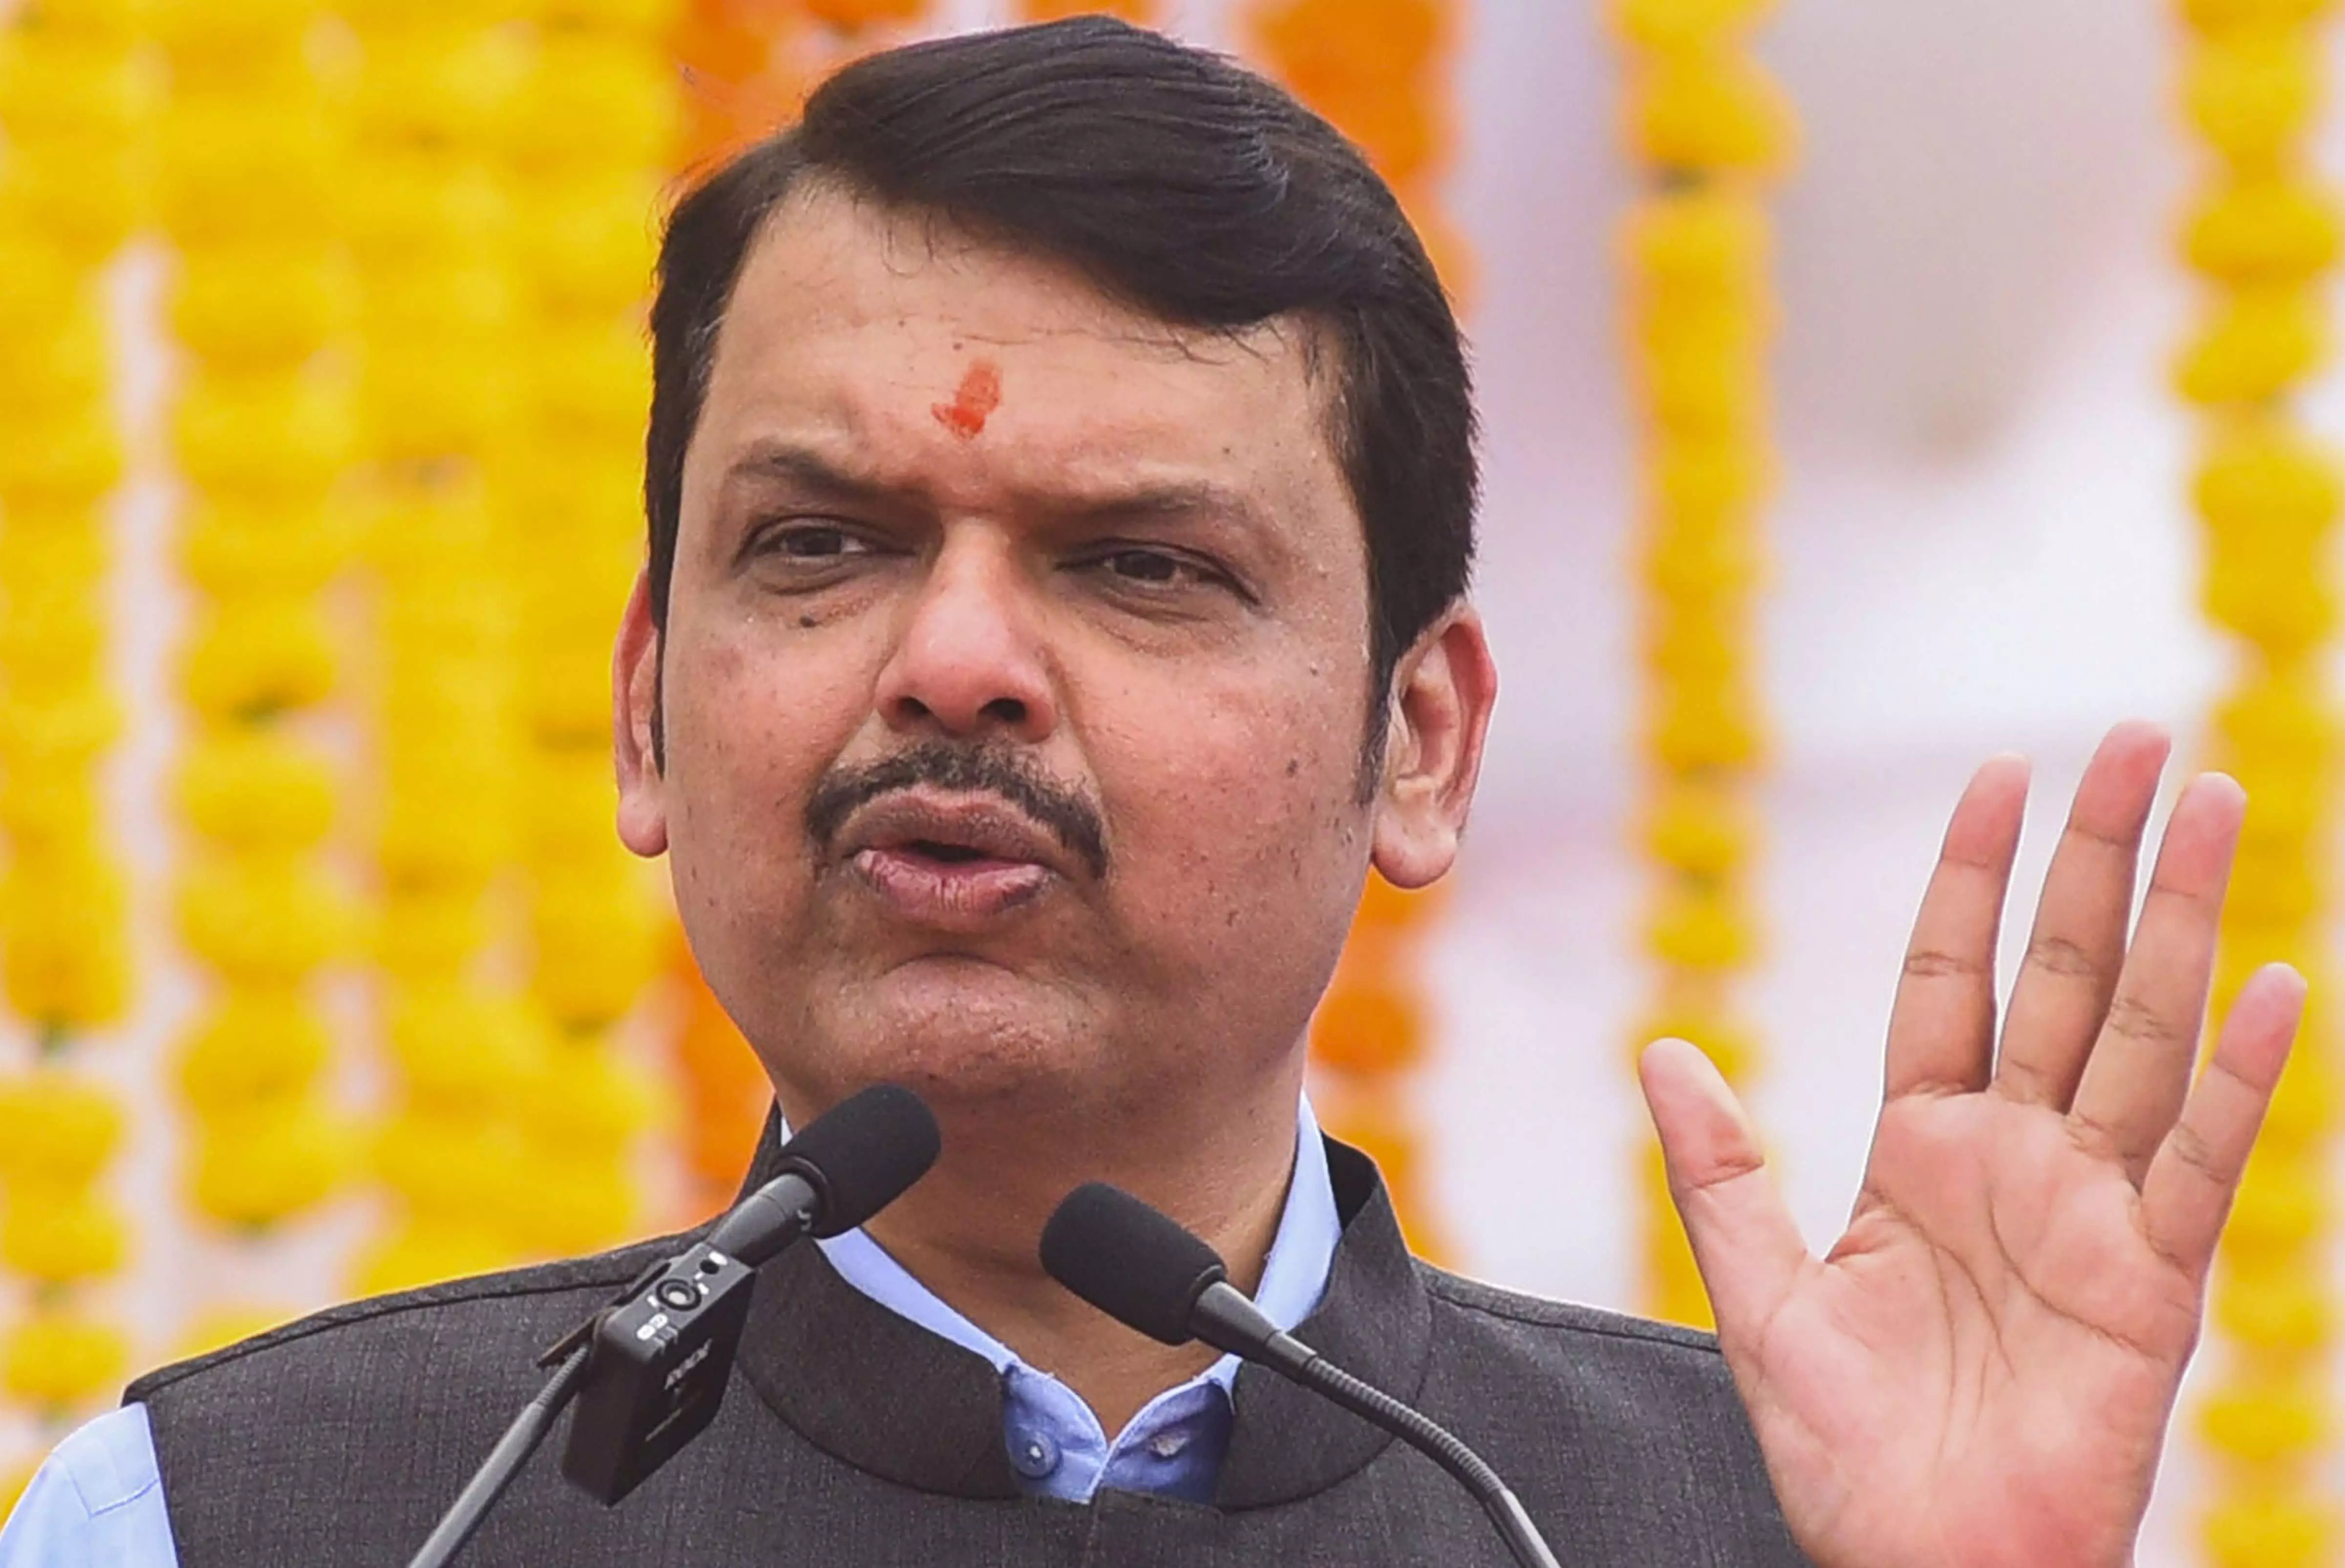 Vote for PM Modi as he got COVID vaccines for us during pandemic: Fadnavis